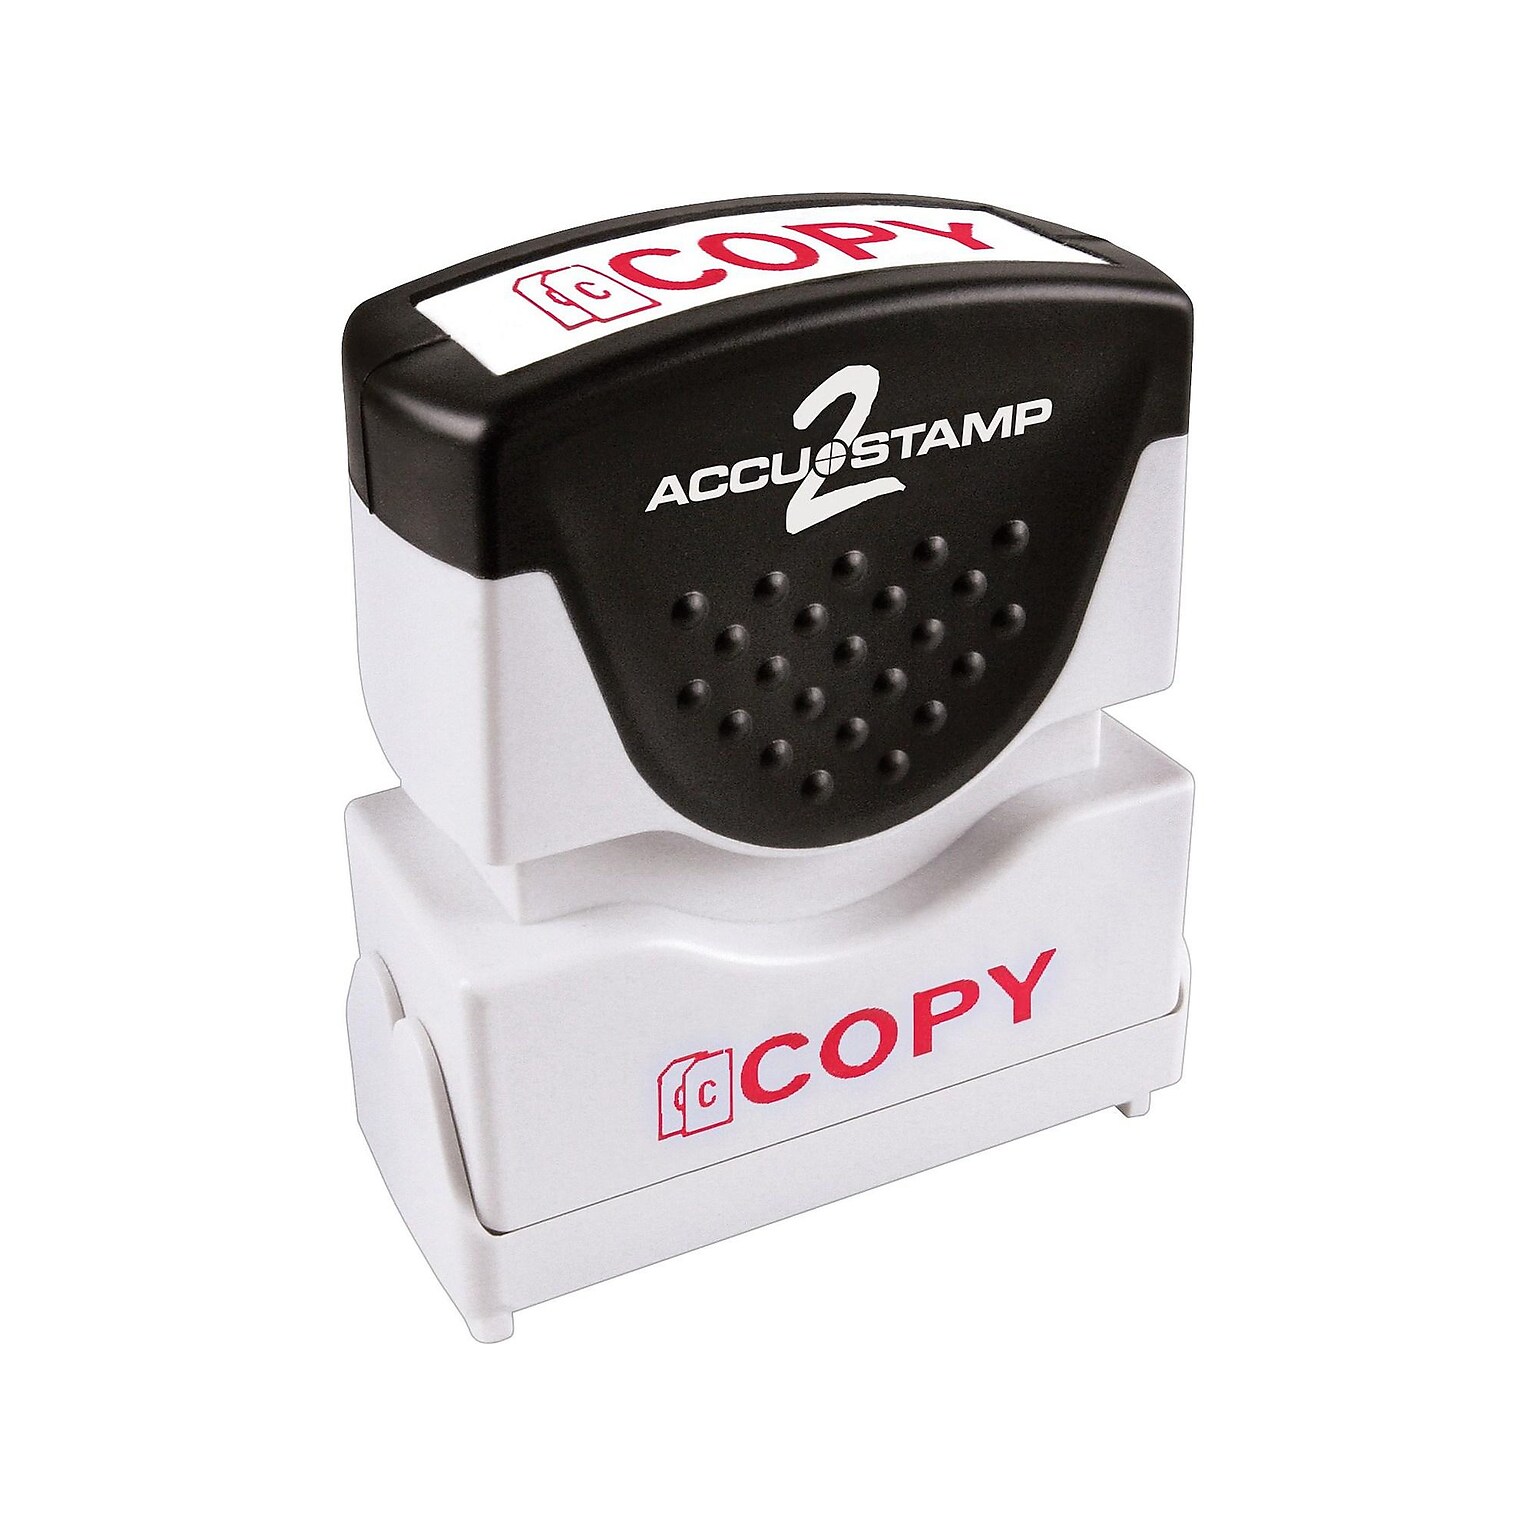 Cosco Accu-Stamp 2 Pre-Inked Stamp, COPY, Red Ink (COS035594)